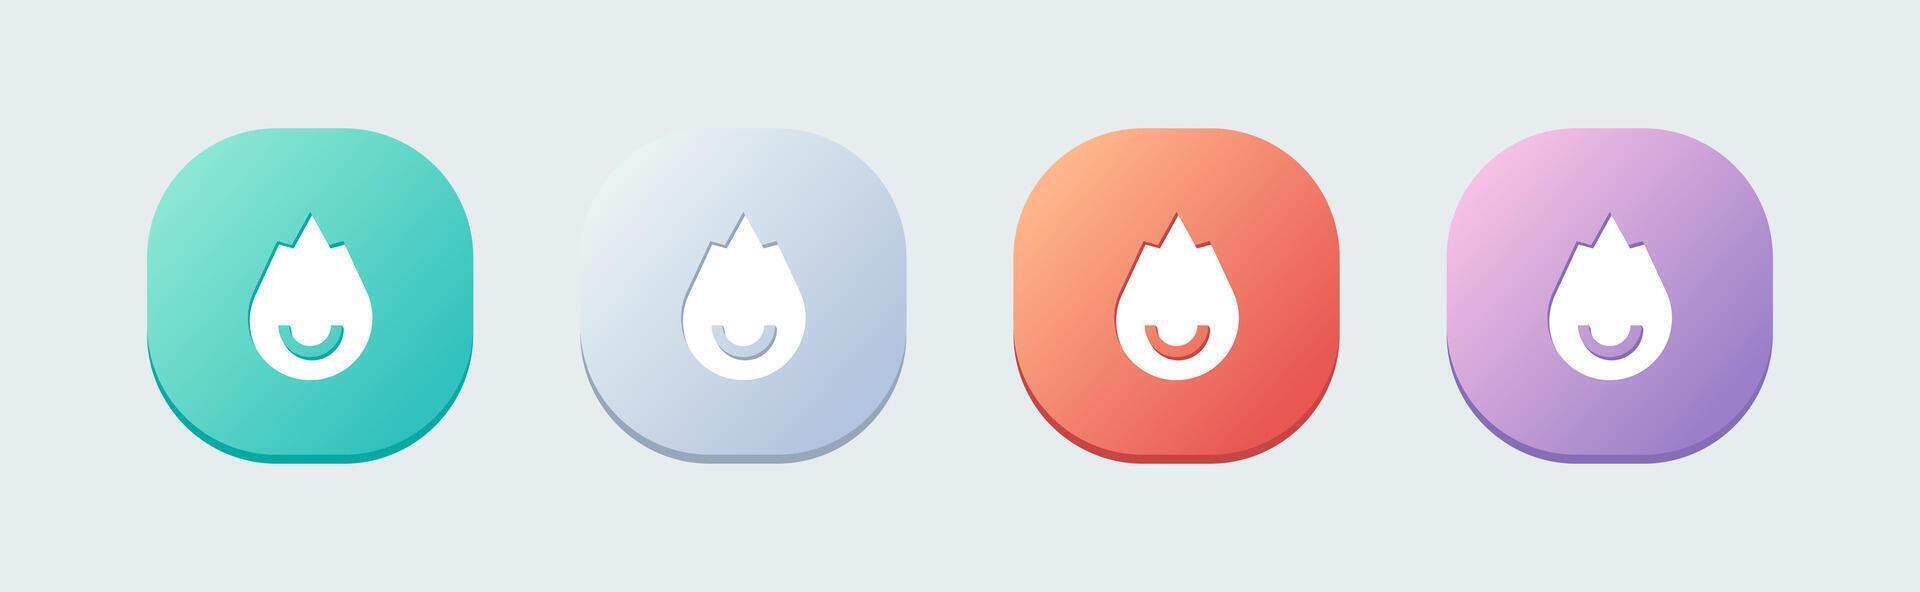 Viral solid icon in flat design style. Flames signs illustration. vector